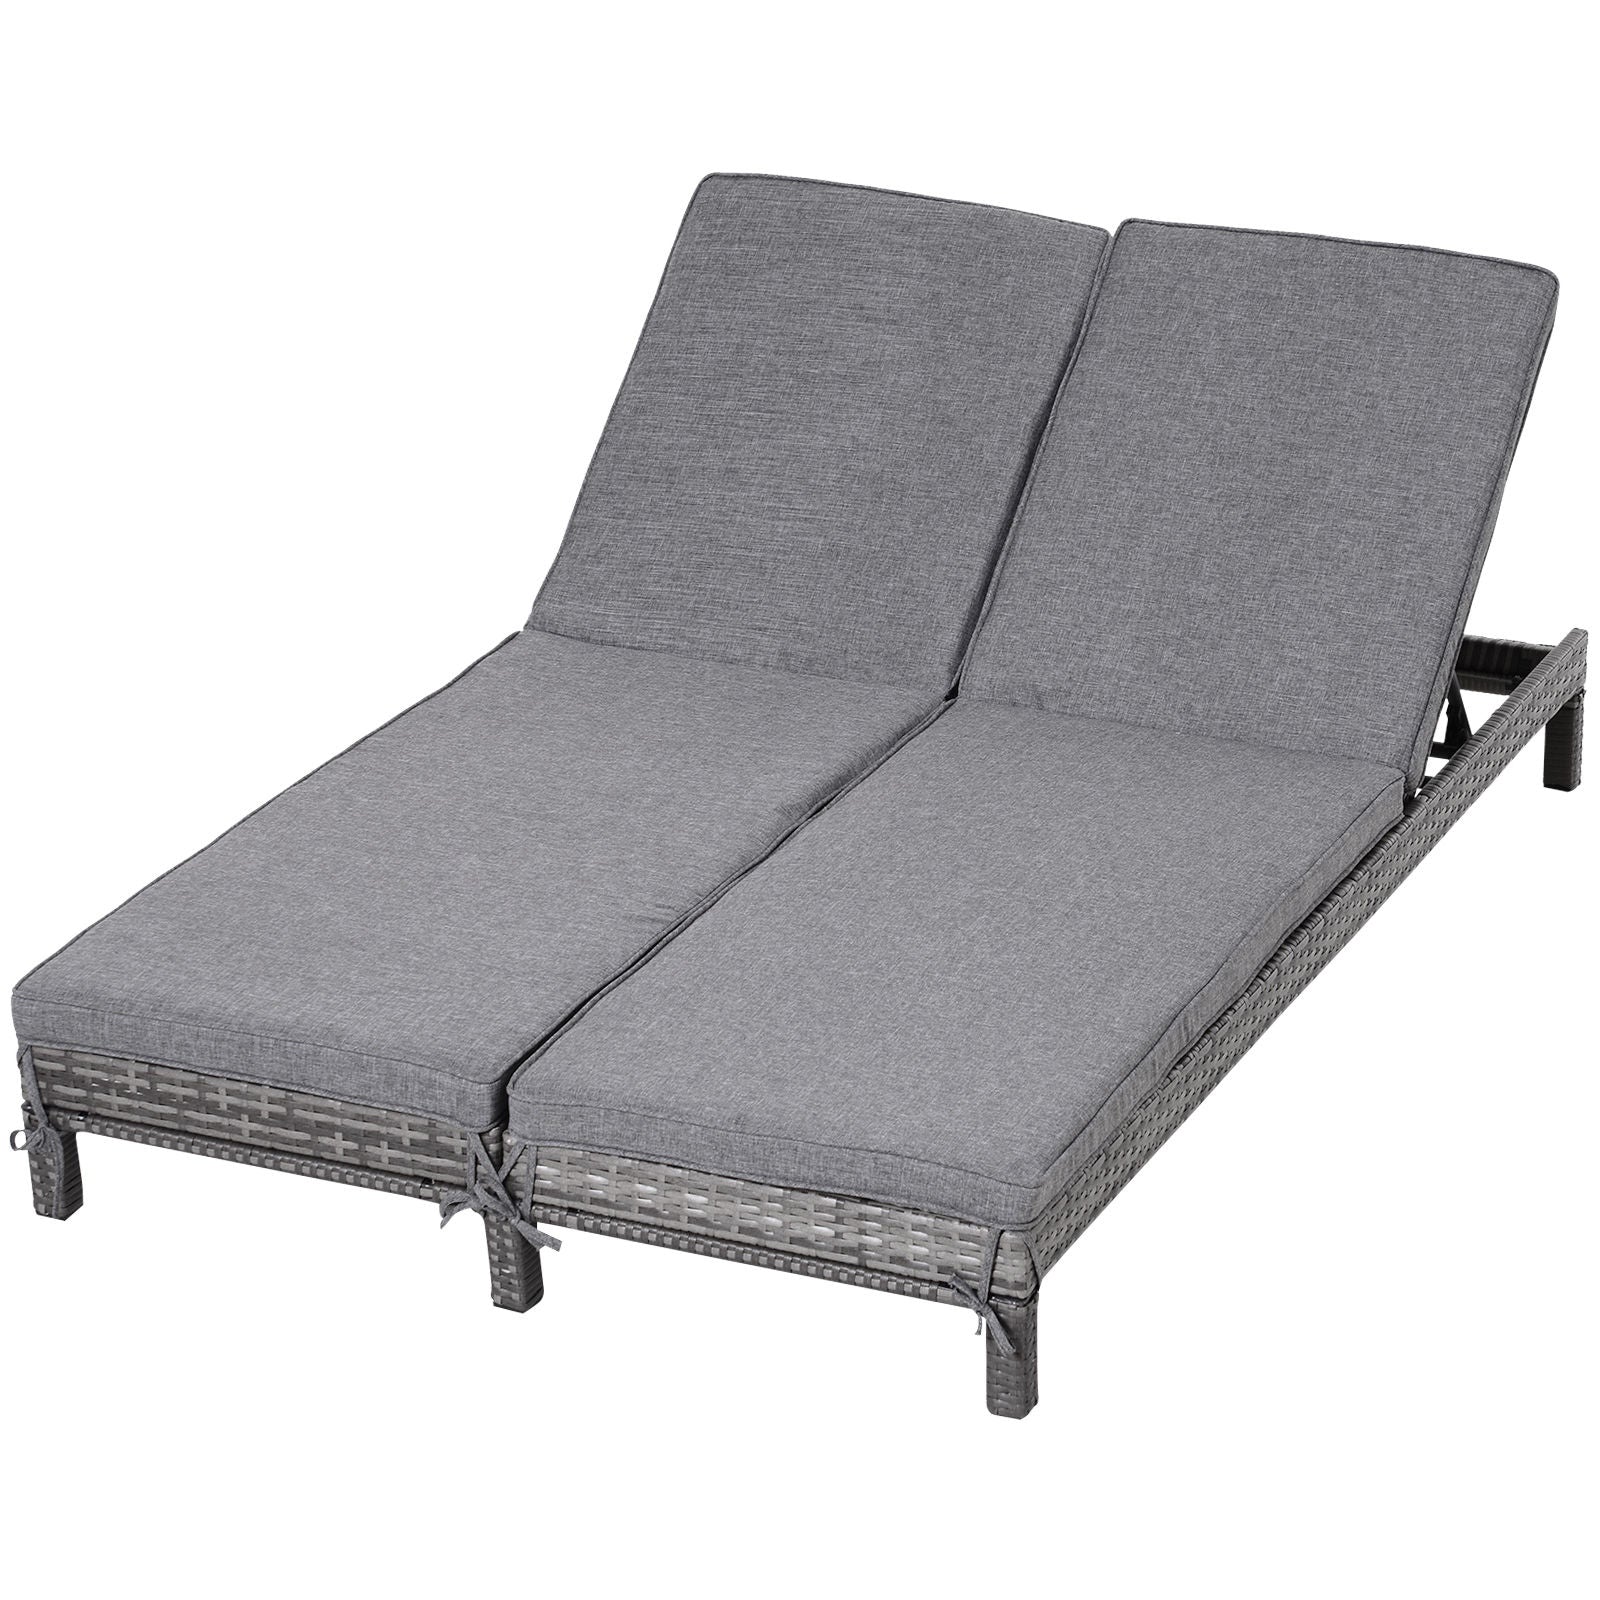 Nancy's Annie Rock Garden Double Lounger - Lounge Bed - Gray